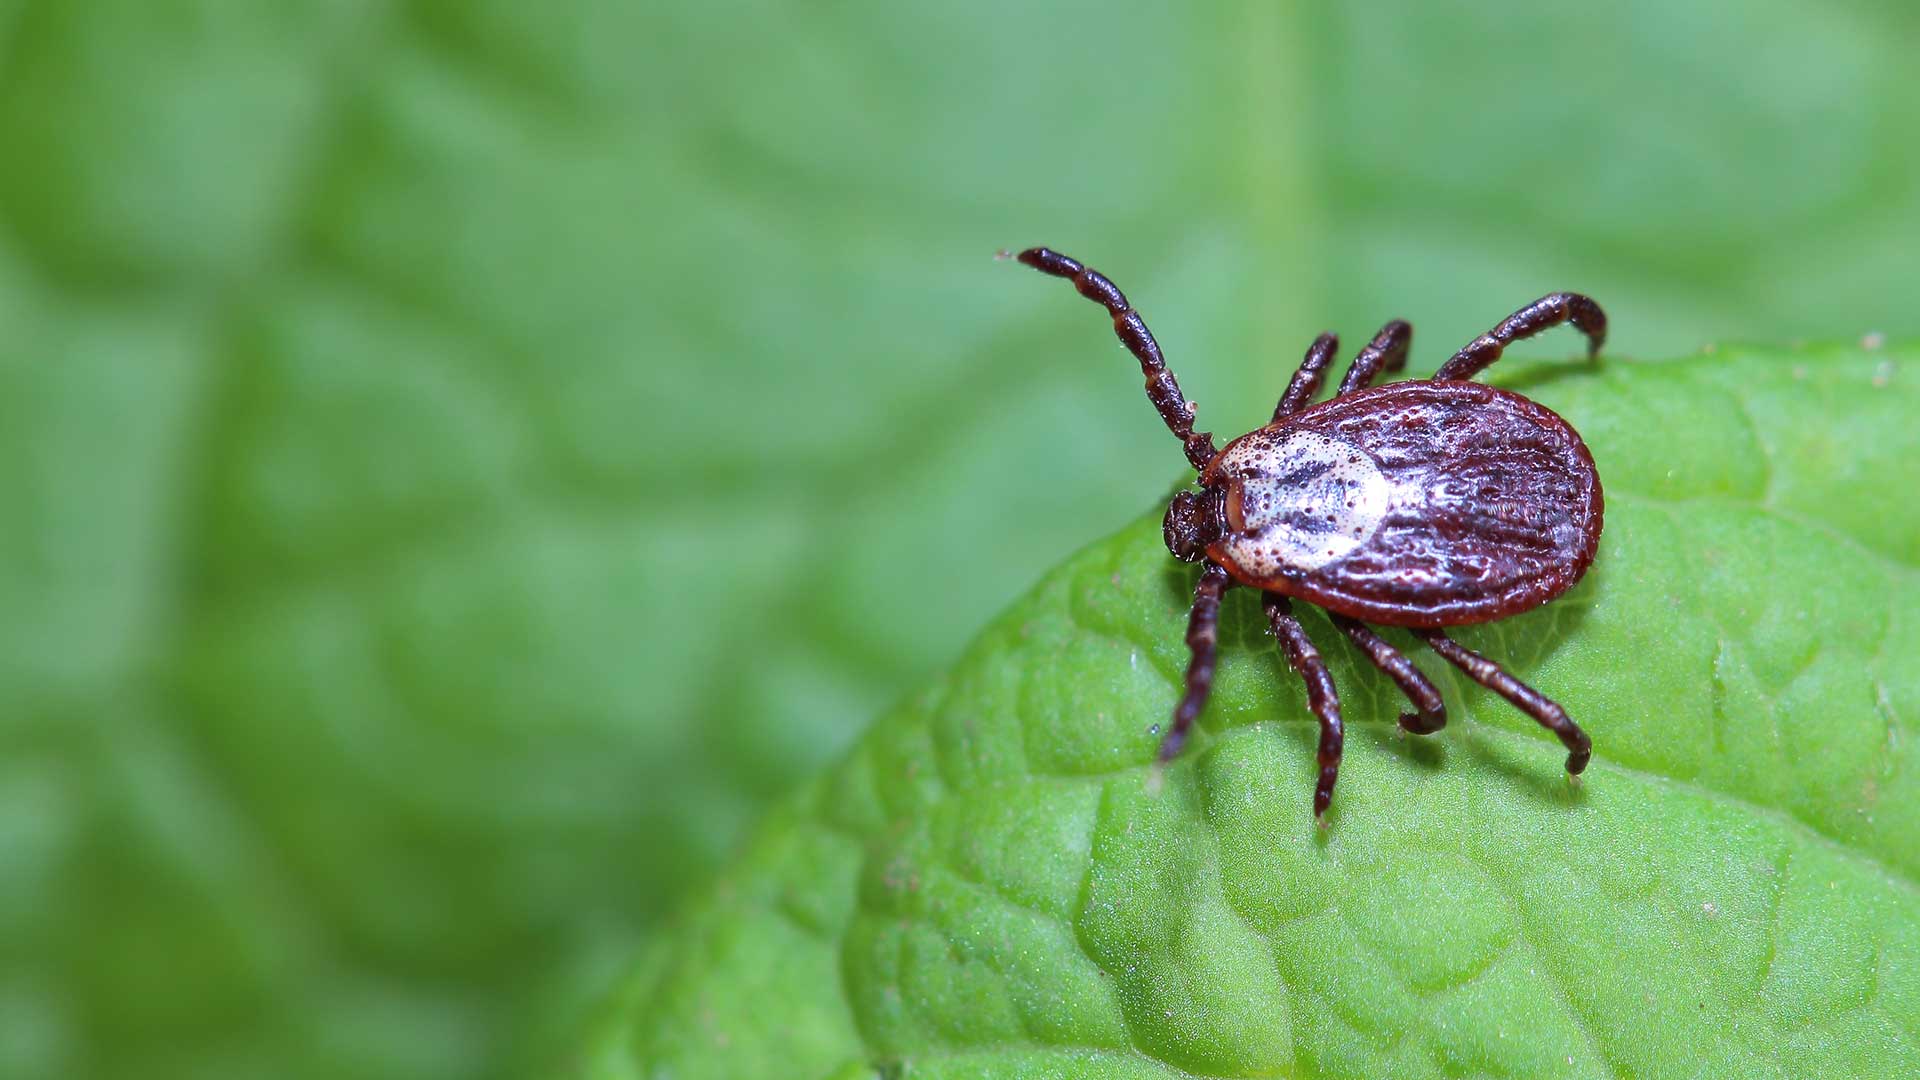 Tick walking across a green leaf in West Chester, Pennsylvania.